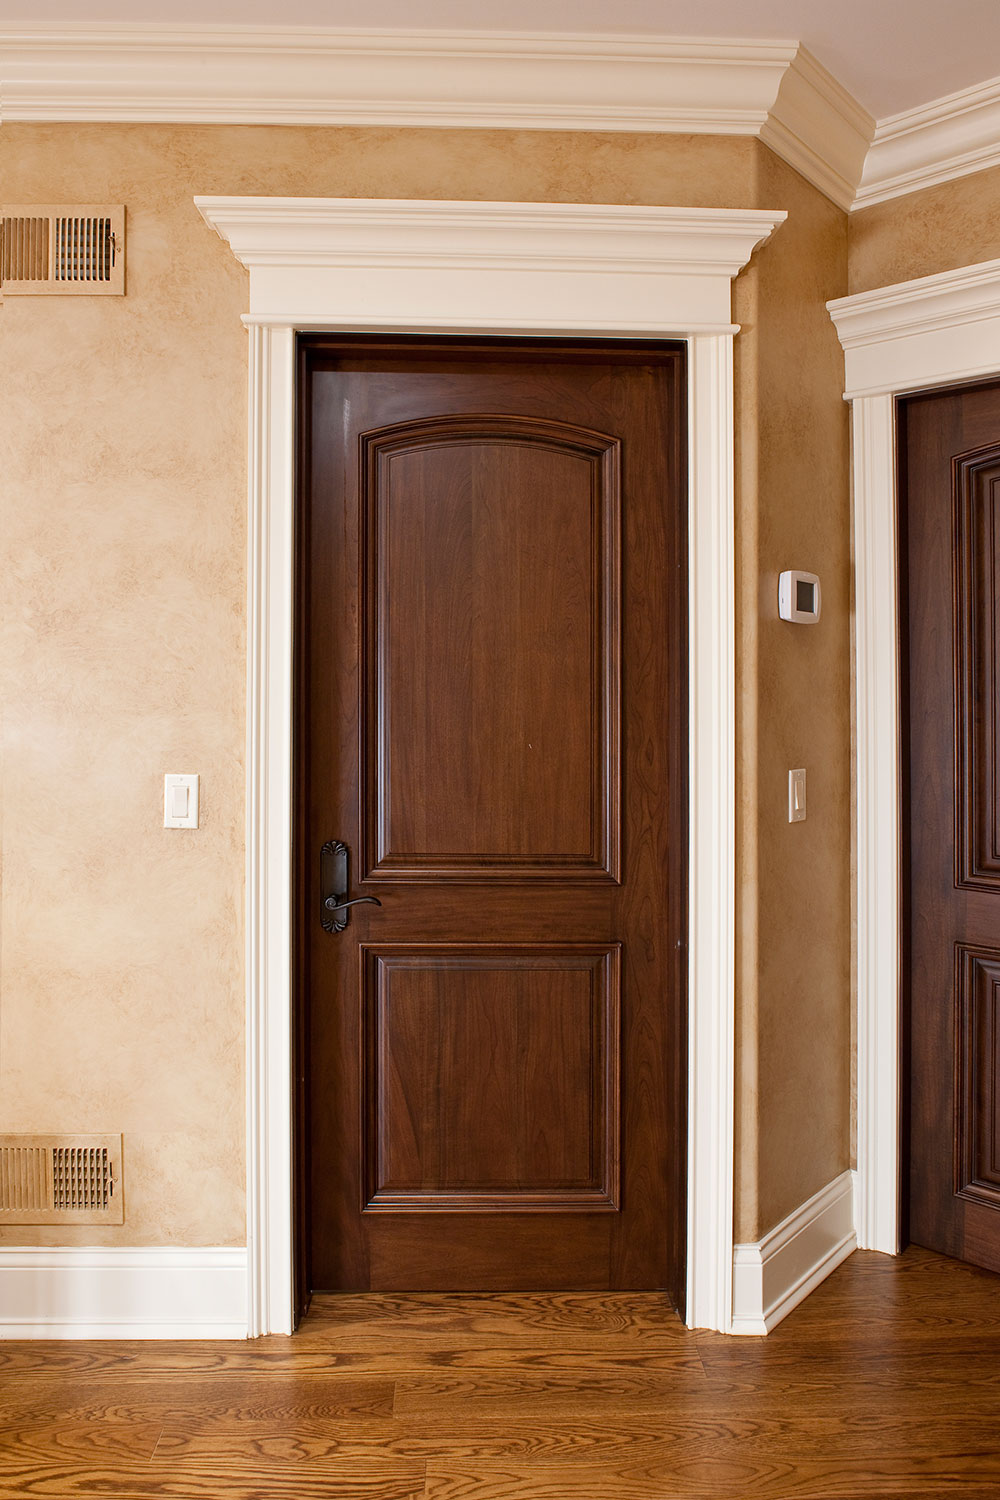 DBI-701A_Mahogany-Walnut | Classic Wood Entry Doors from Doors for  Builders, Inc. | Solid Wood Exterior Doors | Front Doors and Interior Doors  | Custom and In-Stock Mahogany Wood Doors, Chicago, IL